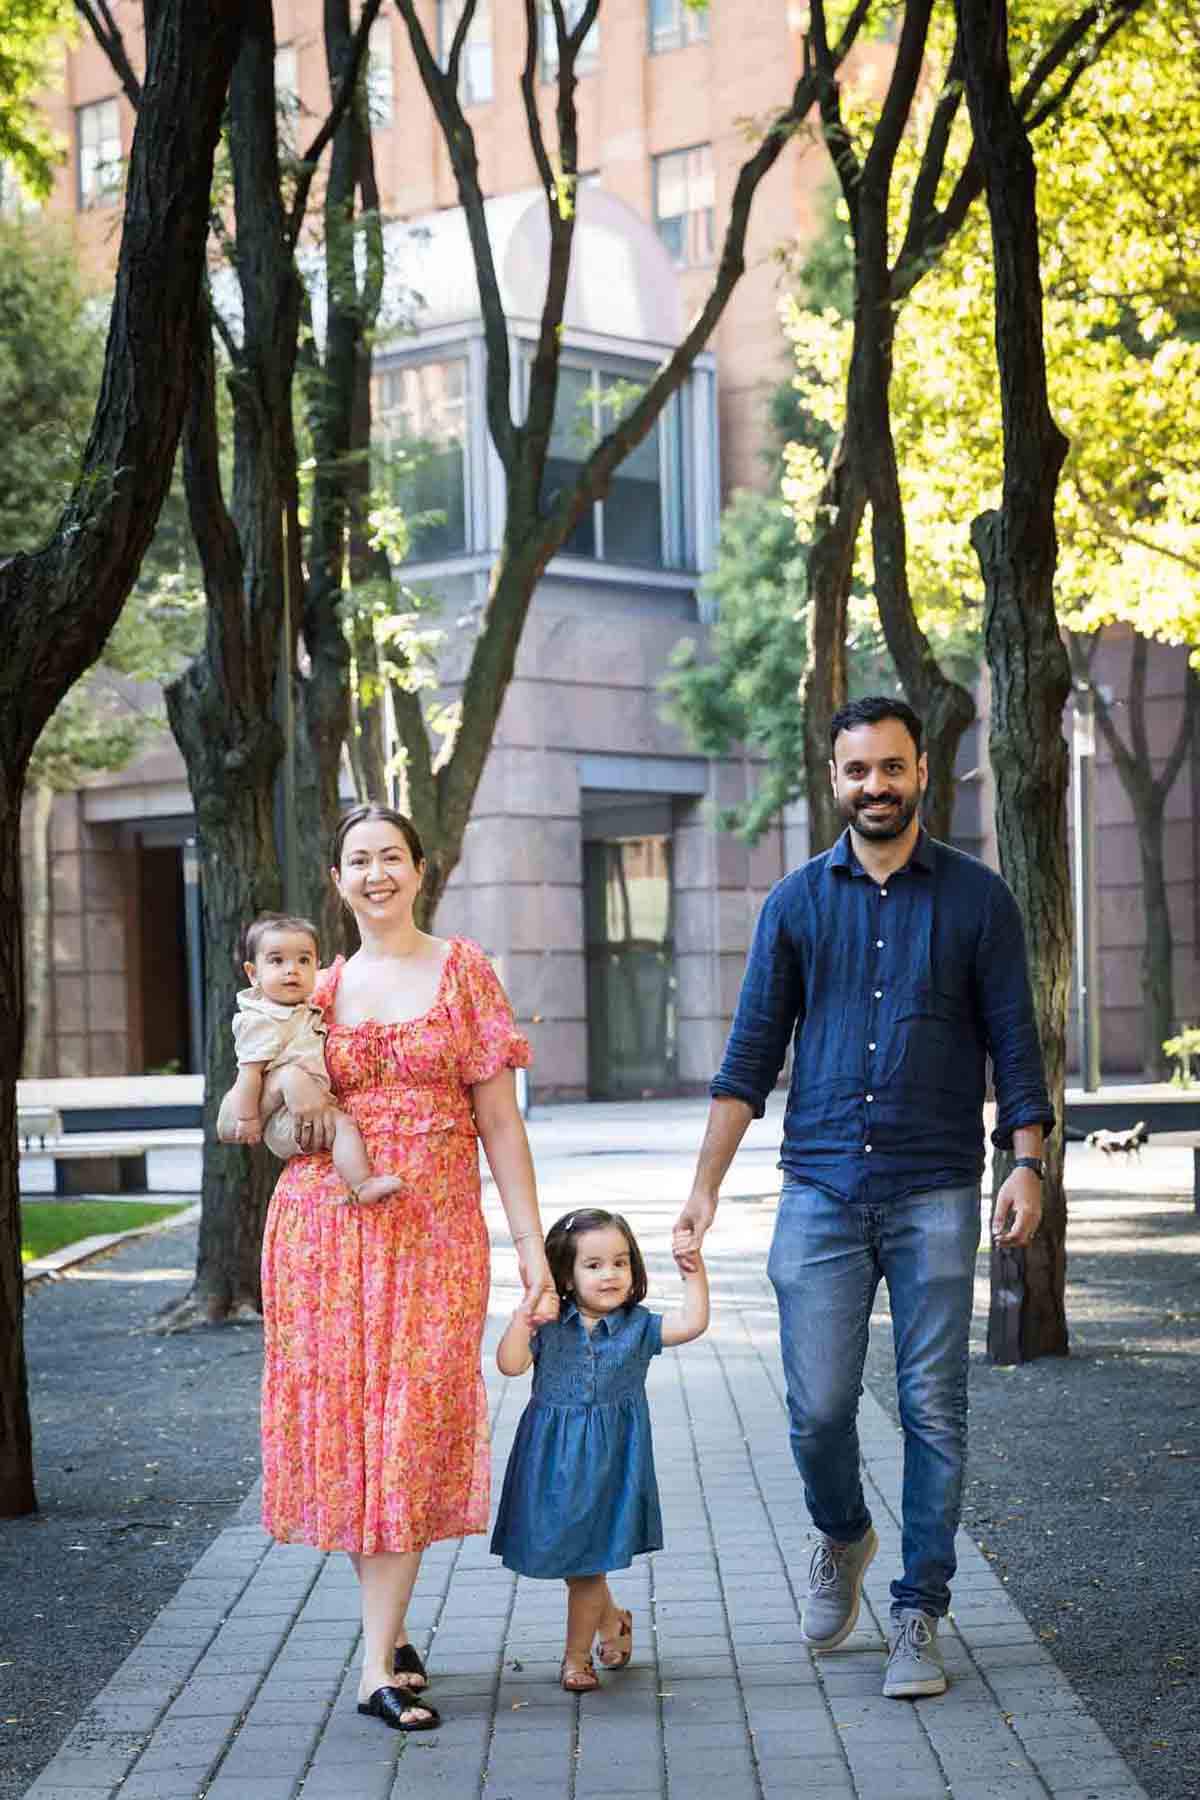 Parents with baby and little girl walking down stone pathway during a Brooklyn Commons family portrait session